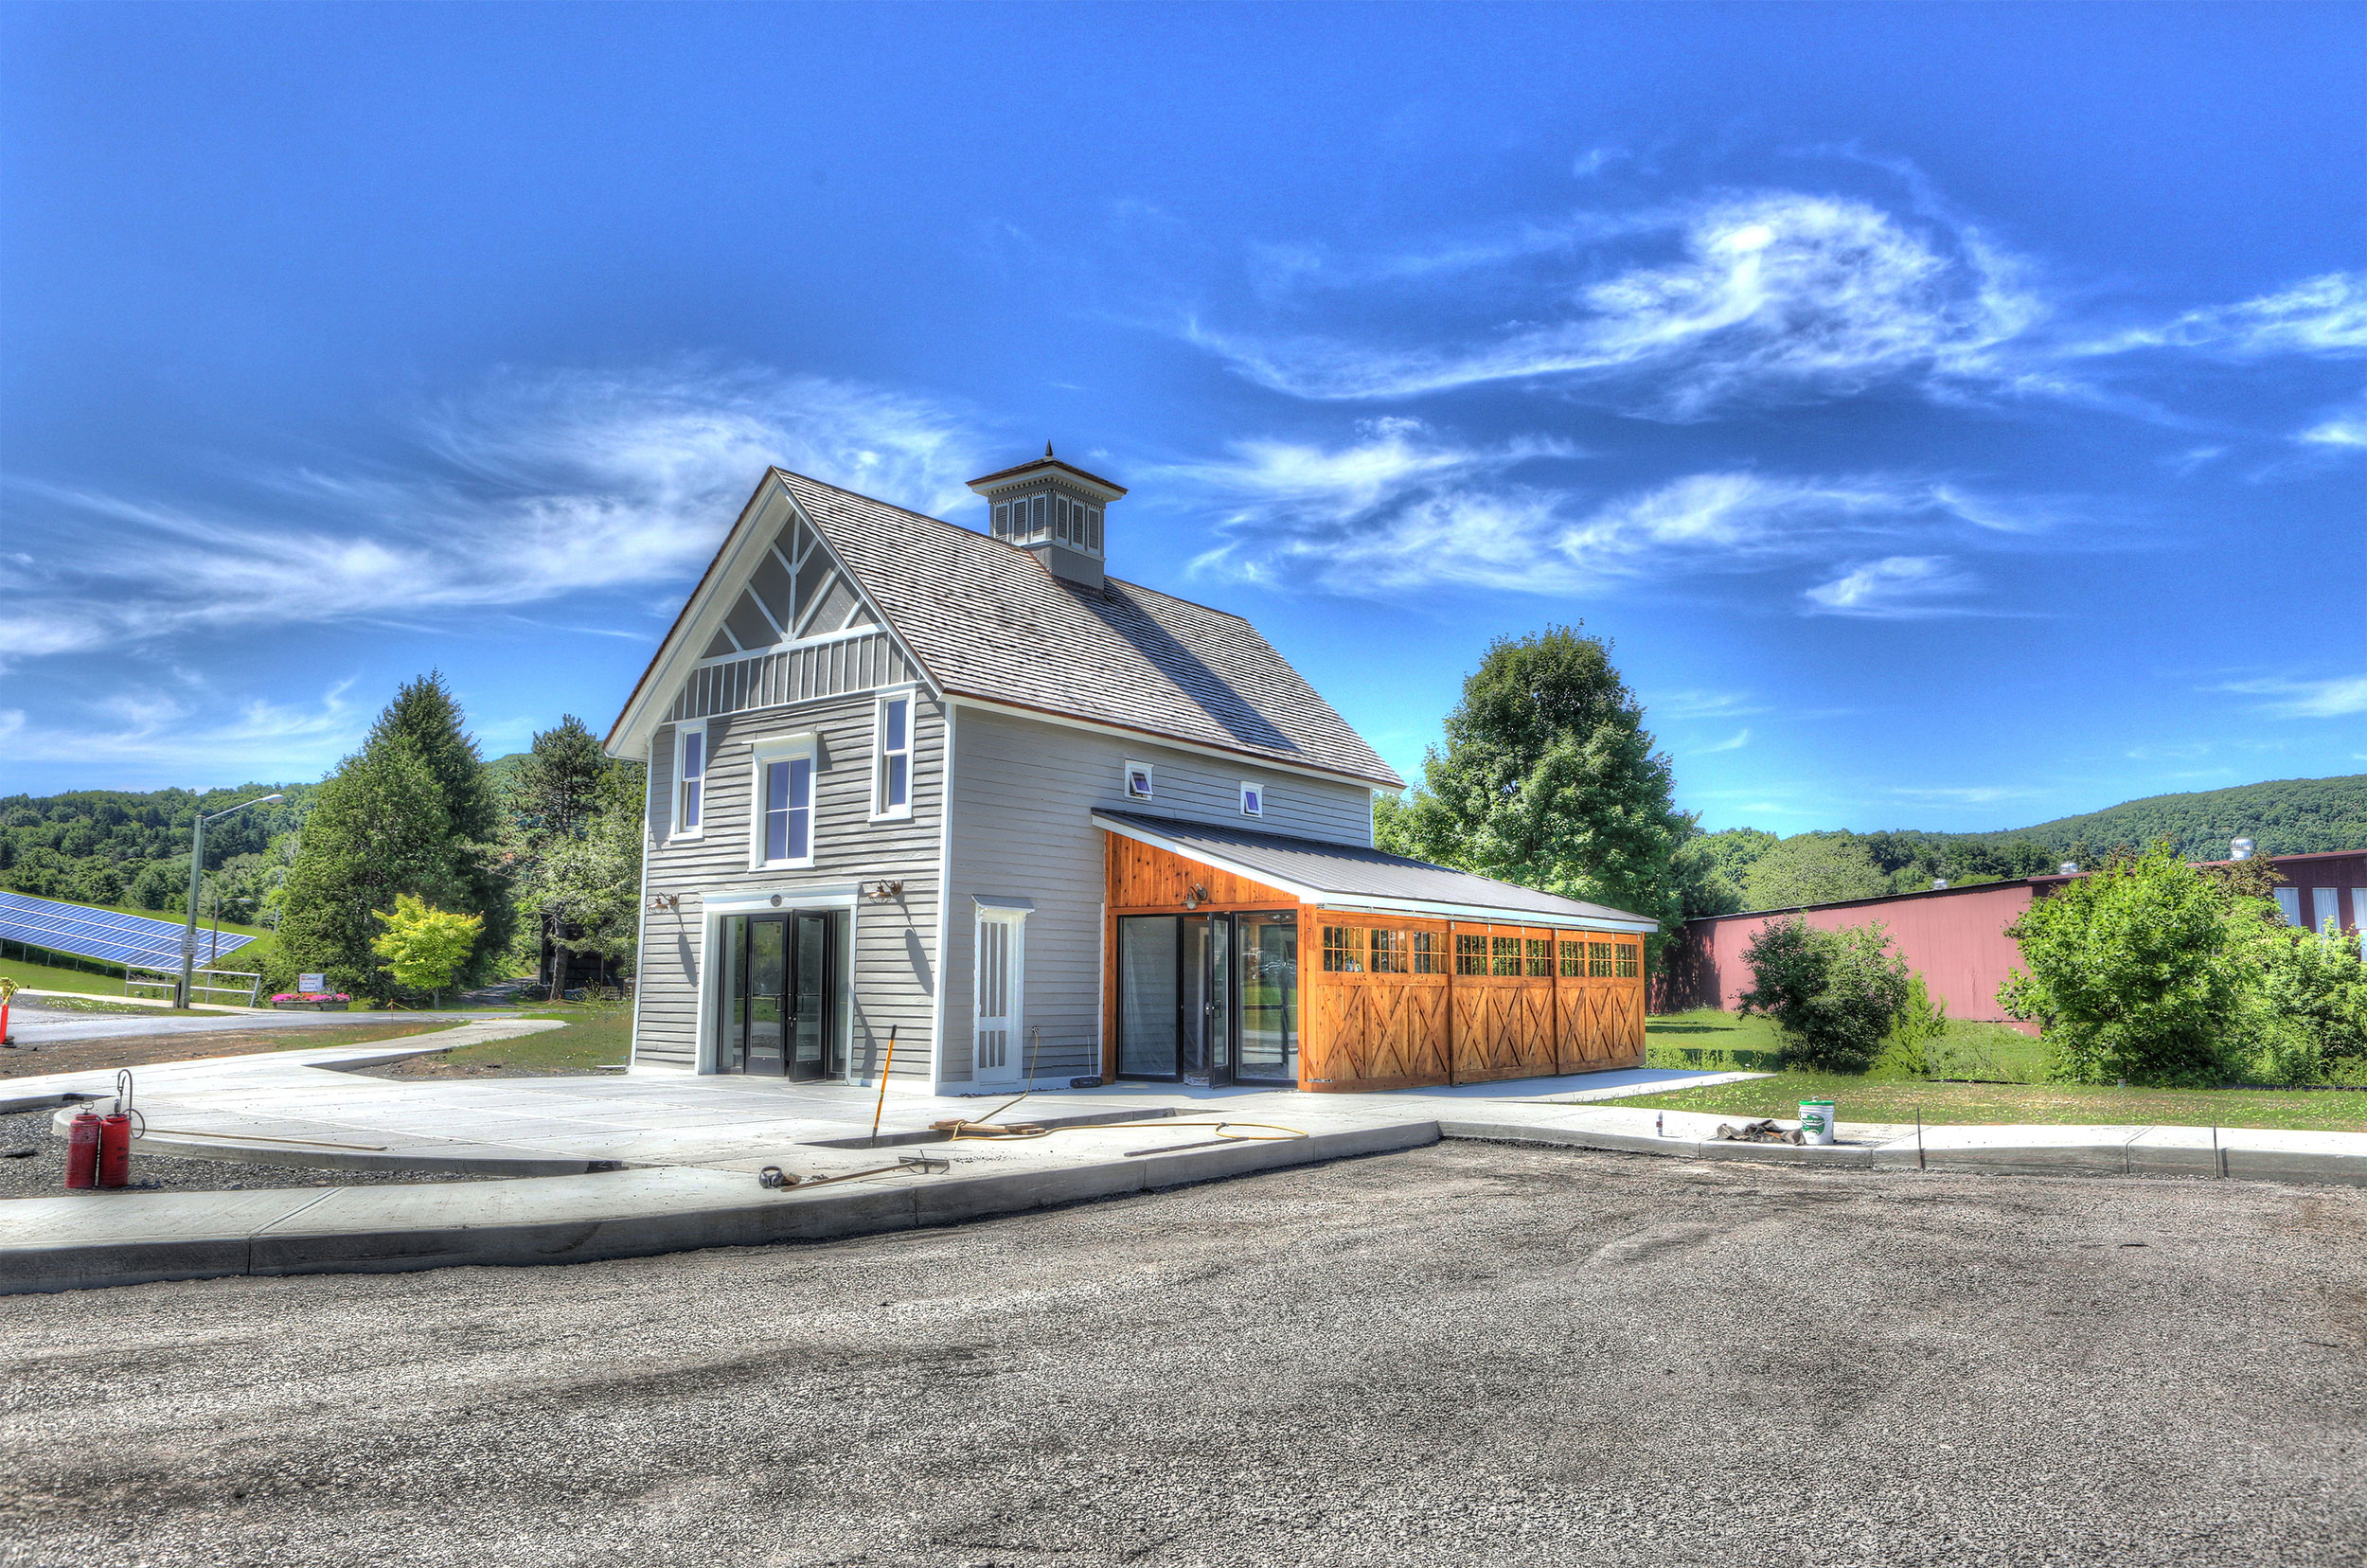 Coblsekill cafe and general store exterior with solar panels on the grass to the left side.